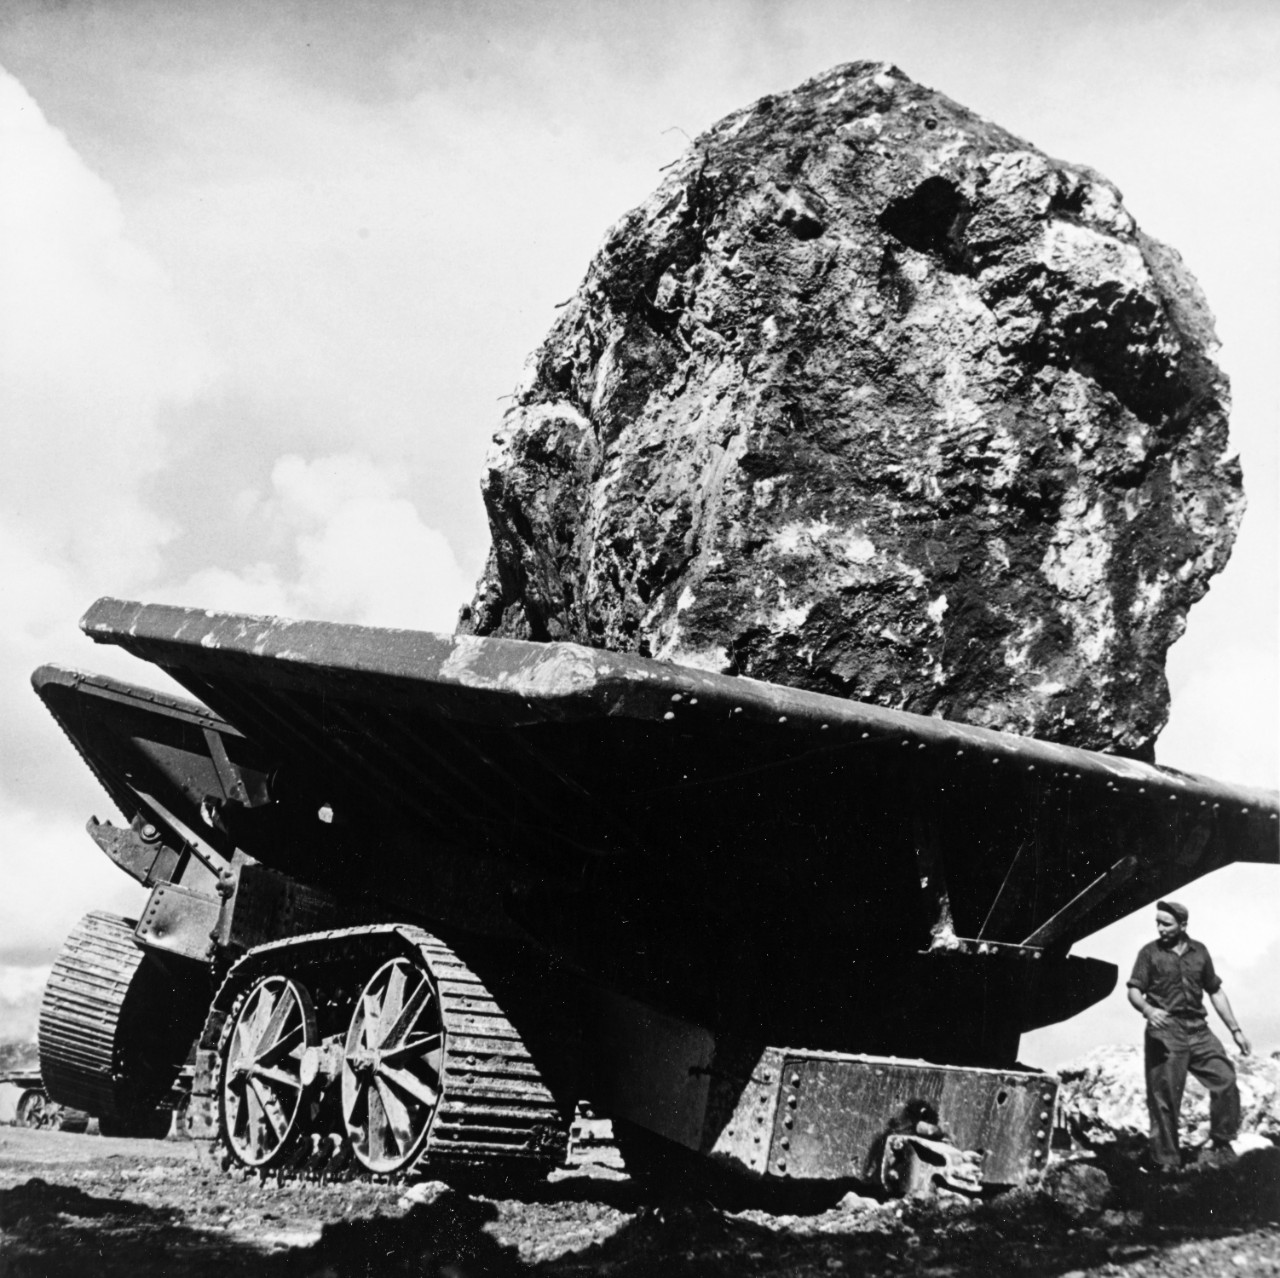 Large Caterpillar cart is positioned to dump a thirty ton boulder, as the 76th Construction Battalion builds Apra Harbor's two mile long breakwater, August 1945.